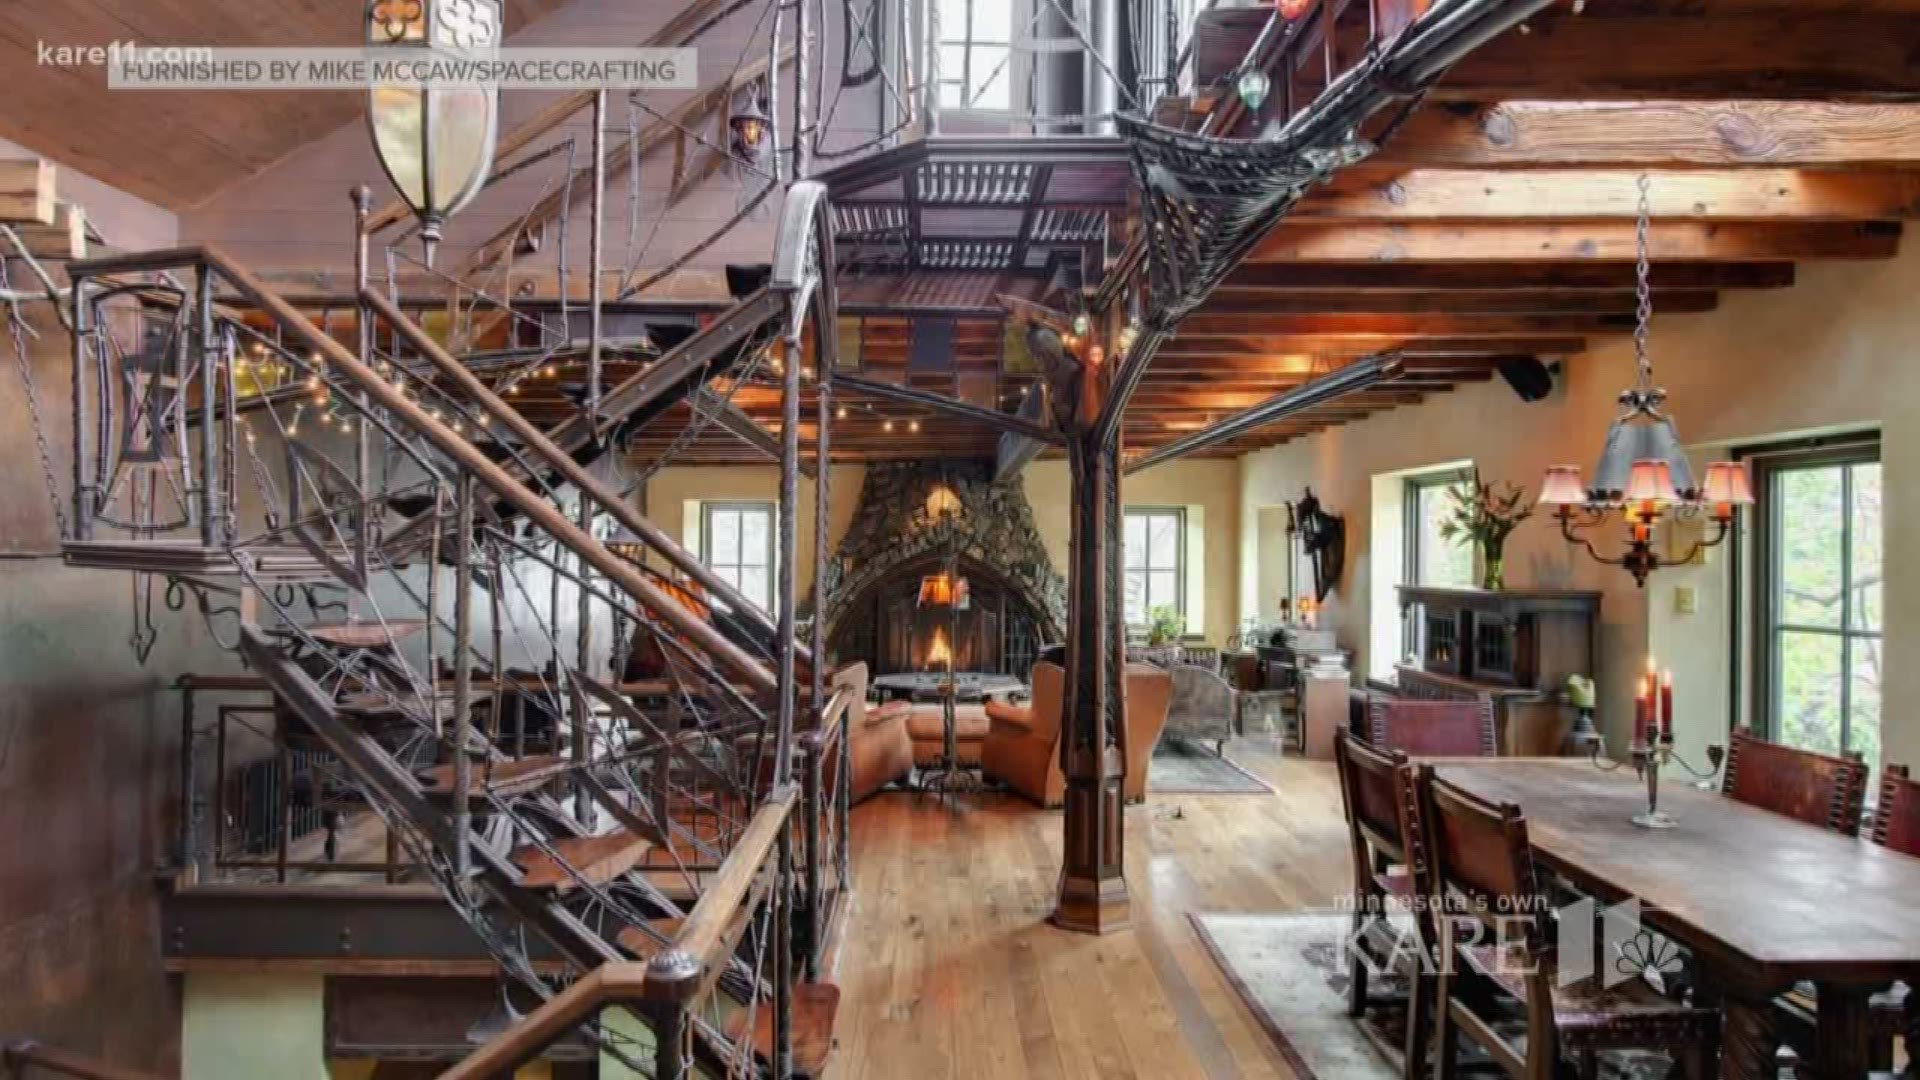 An urban castle, known as the "Harry Potter" house, is back on the market in downtown Minneapolis. https://kare11.tv/2GxeBAw